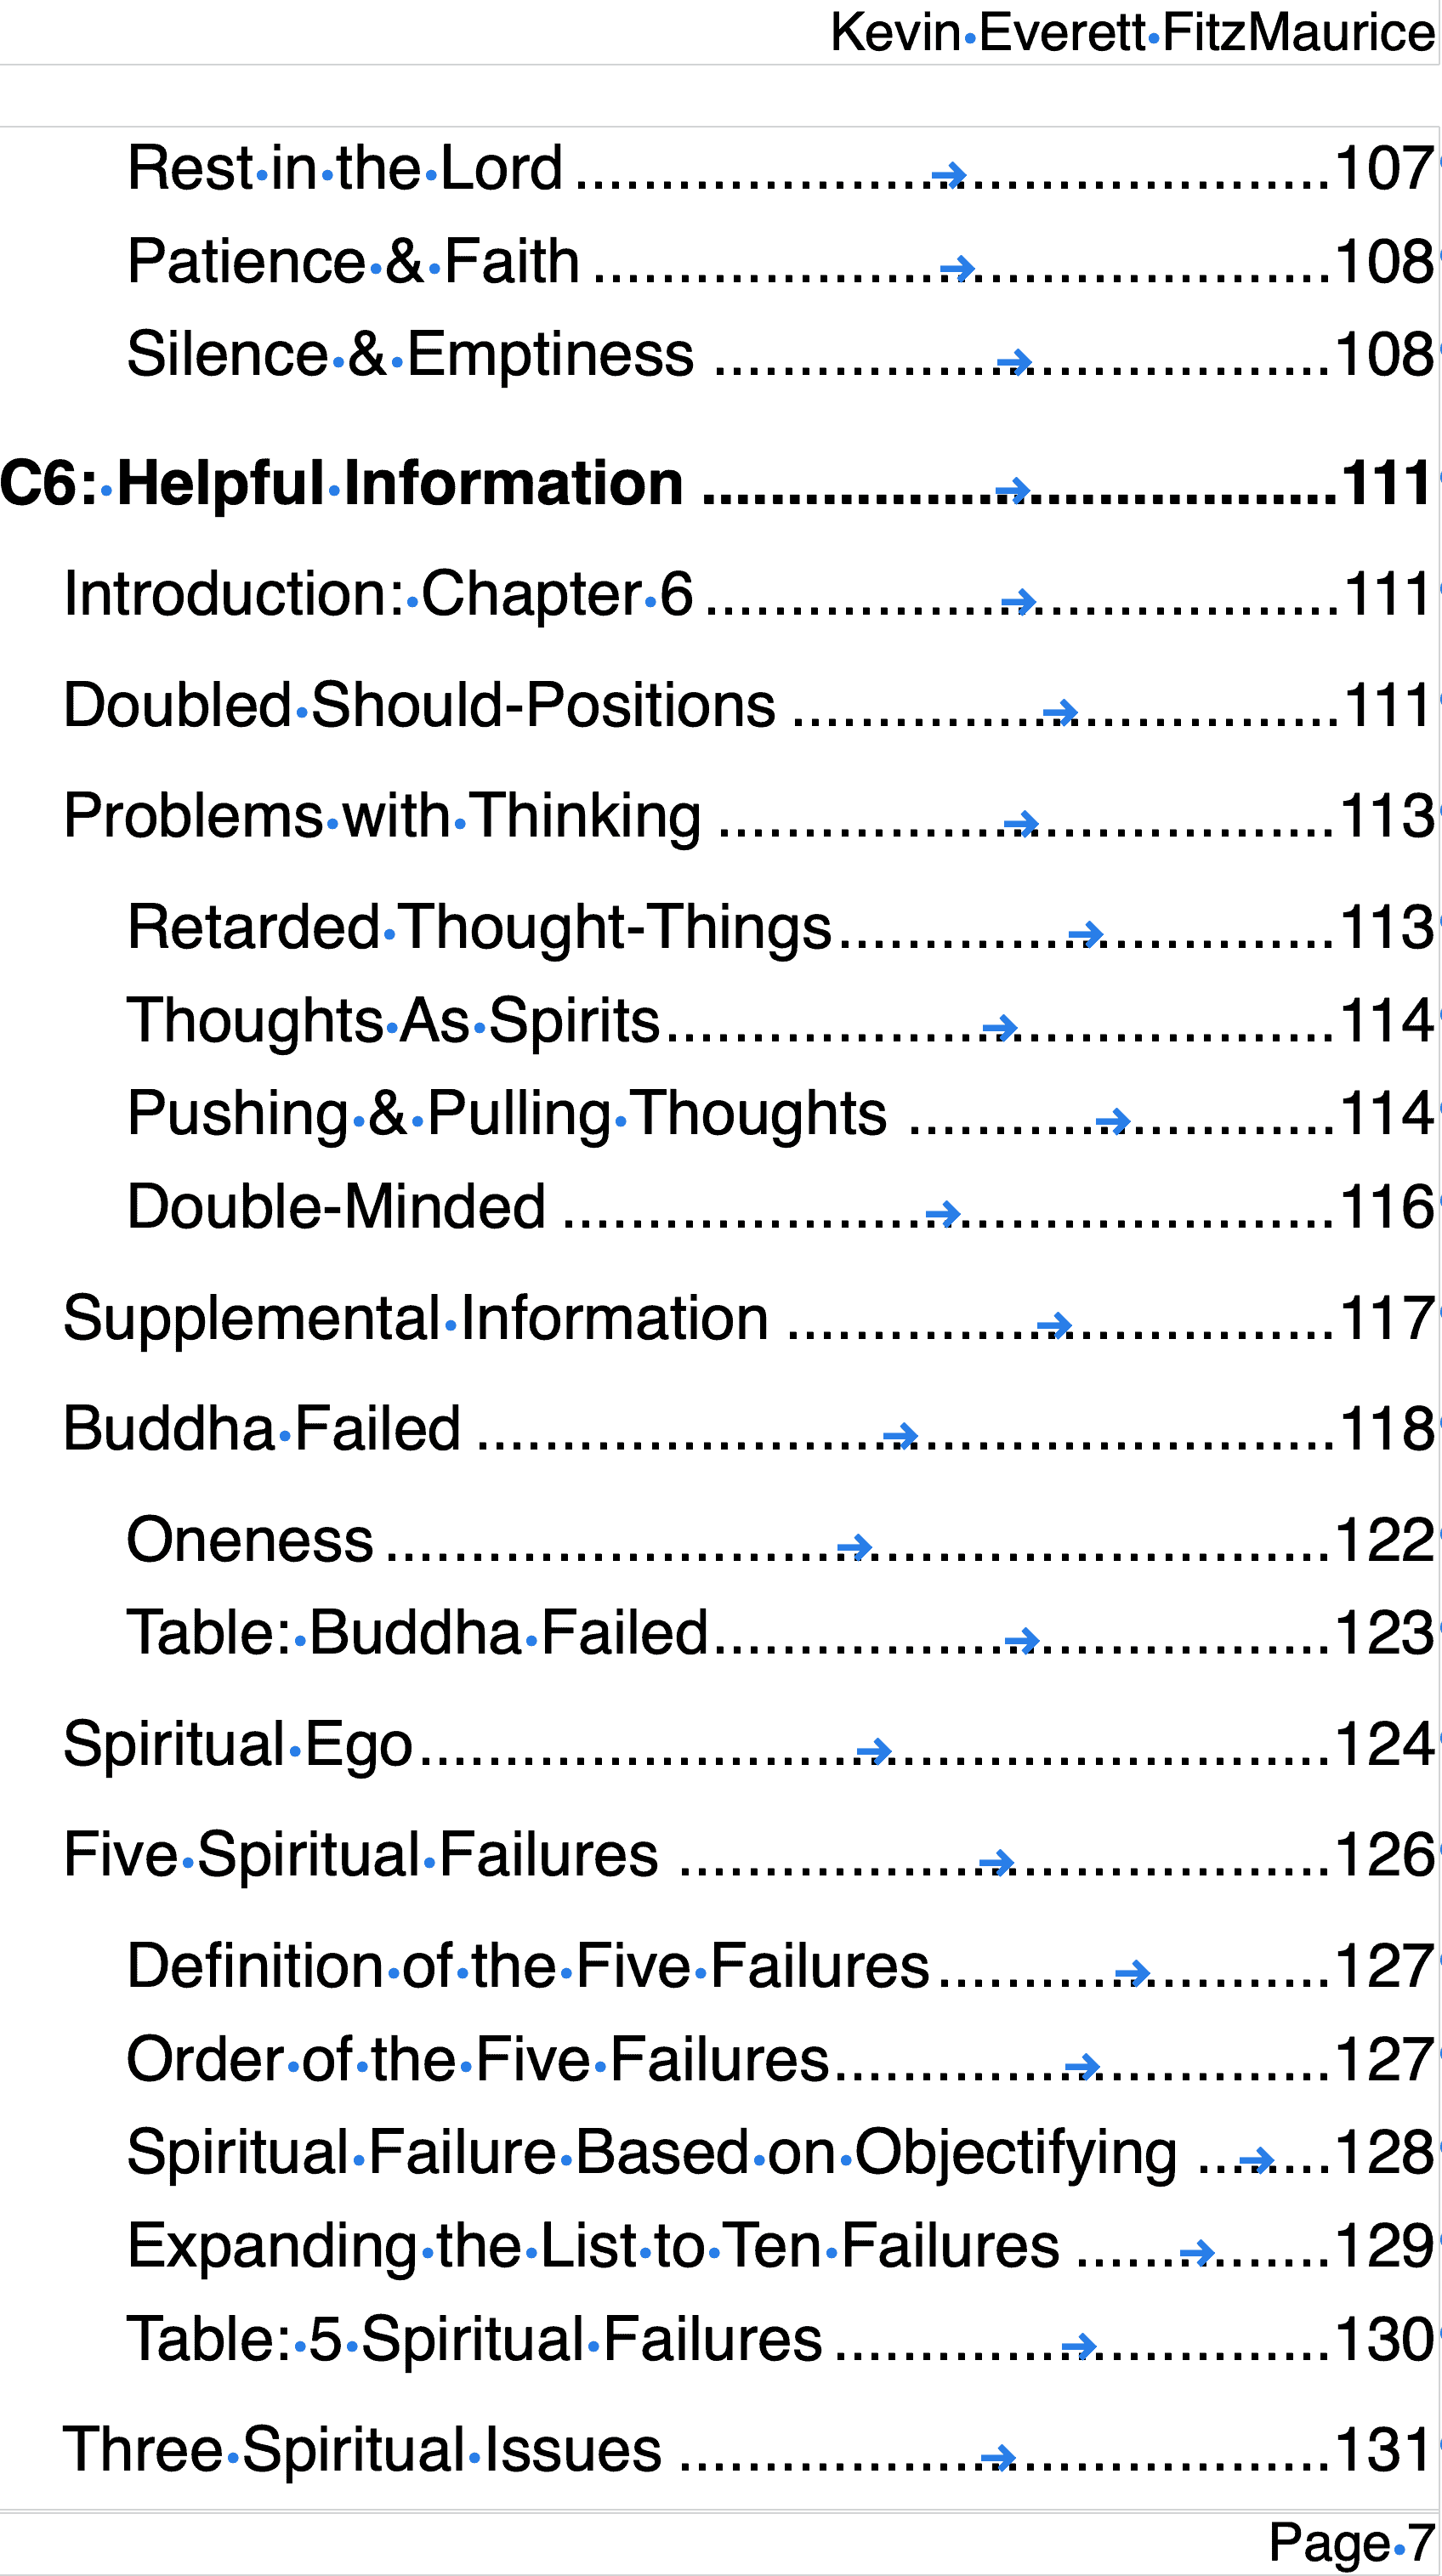 Contents for "Spiritual Surrender's Seven Steps" page 7